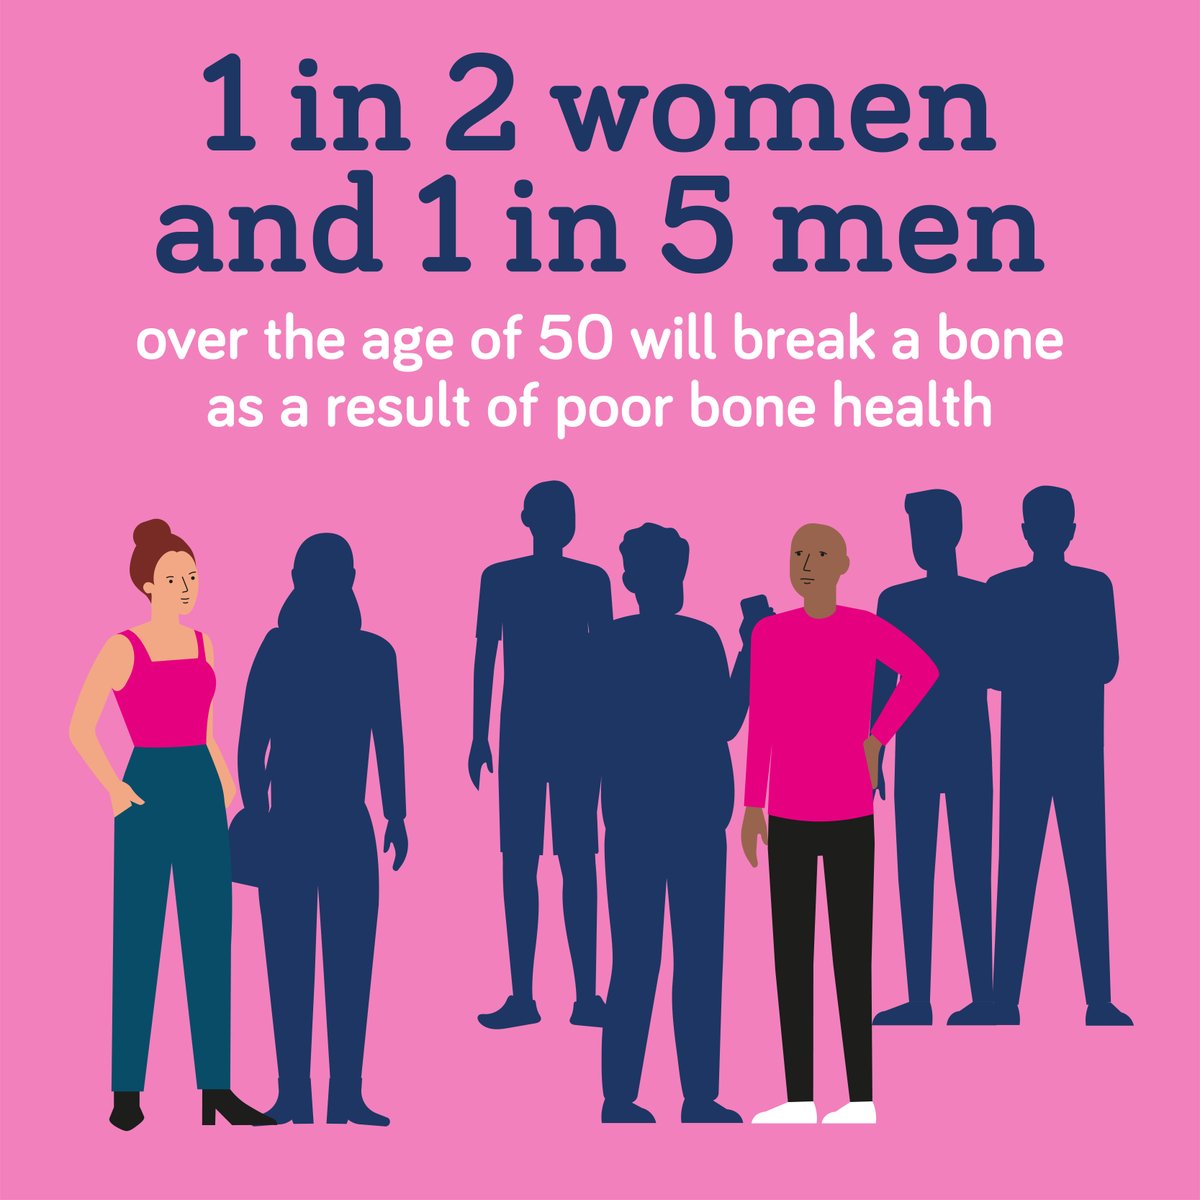 1 in 2 women and 1 in 5 men over 50 will break a bone due to poor bone health. Women are impacted more due to the menopause. Find more info and support on our website: theros.org.uk/information-an…
#osteoporosis